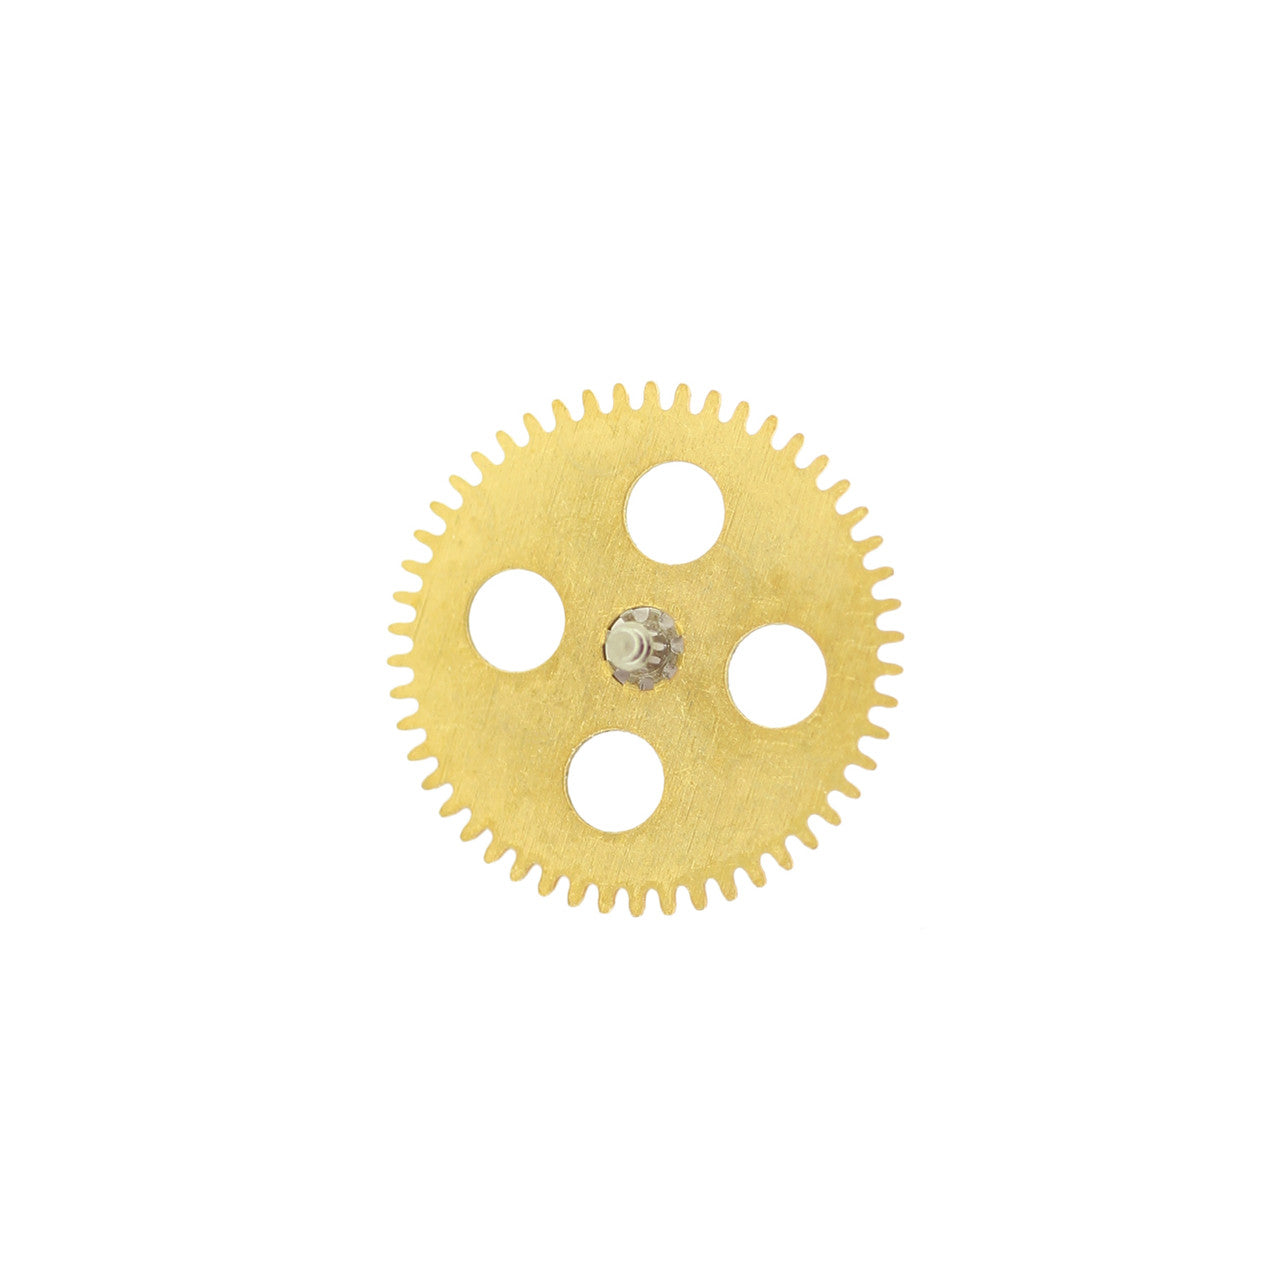 Driving Wheel for Ratchet Wheel Fits Rolex® 1530